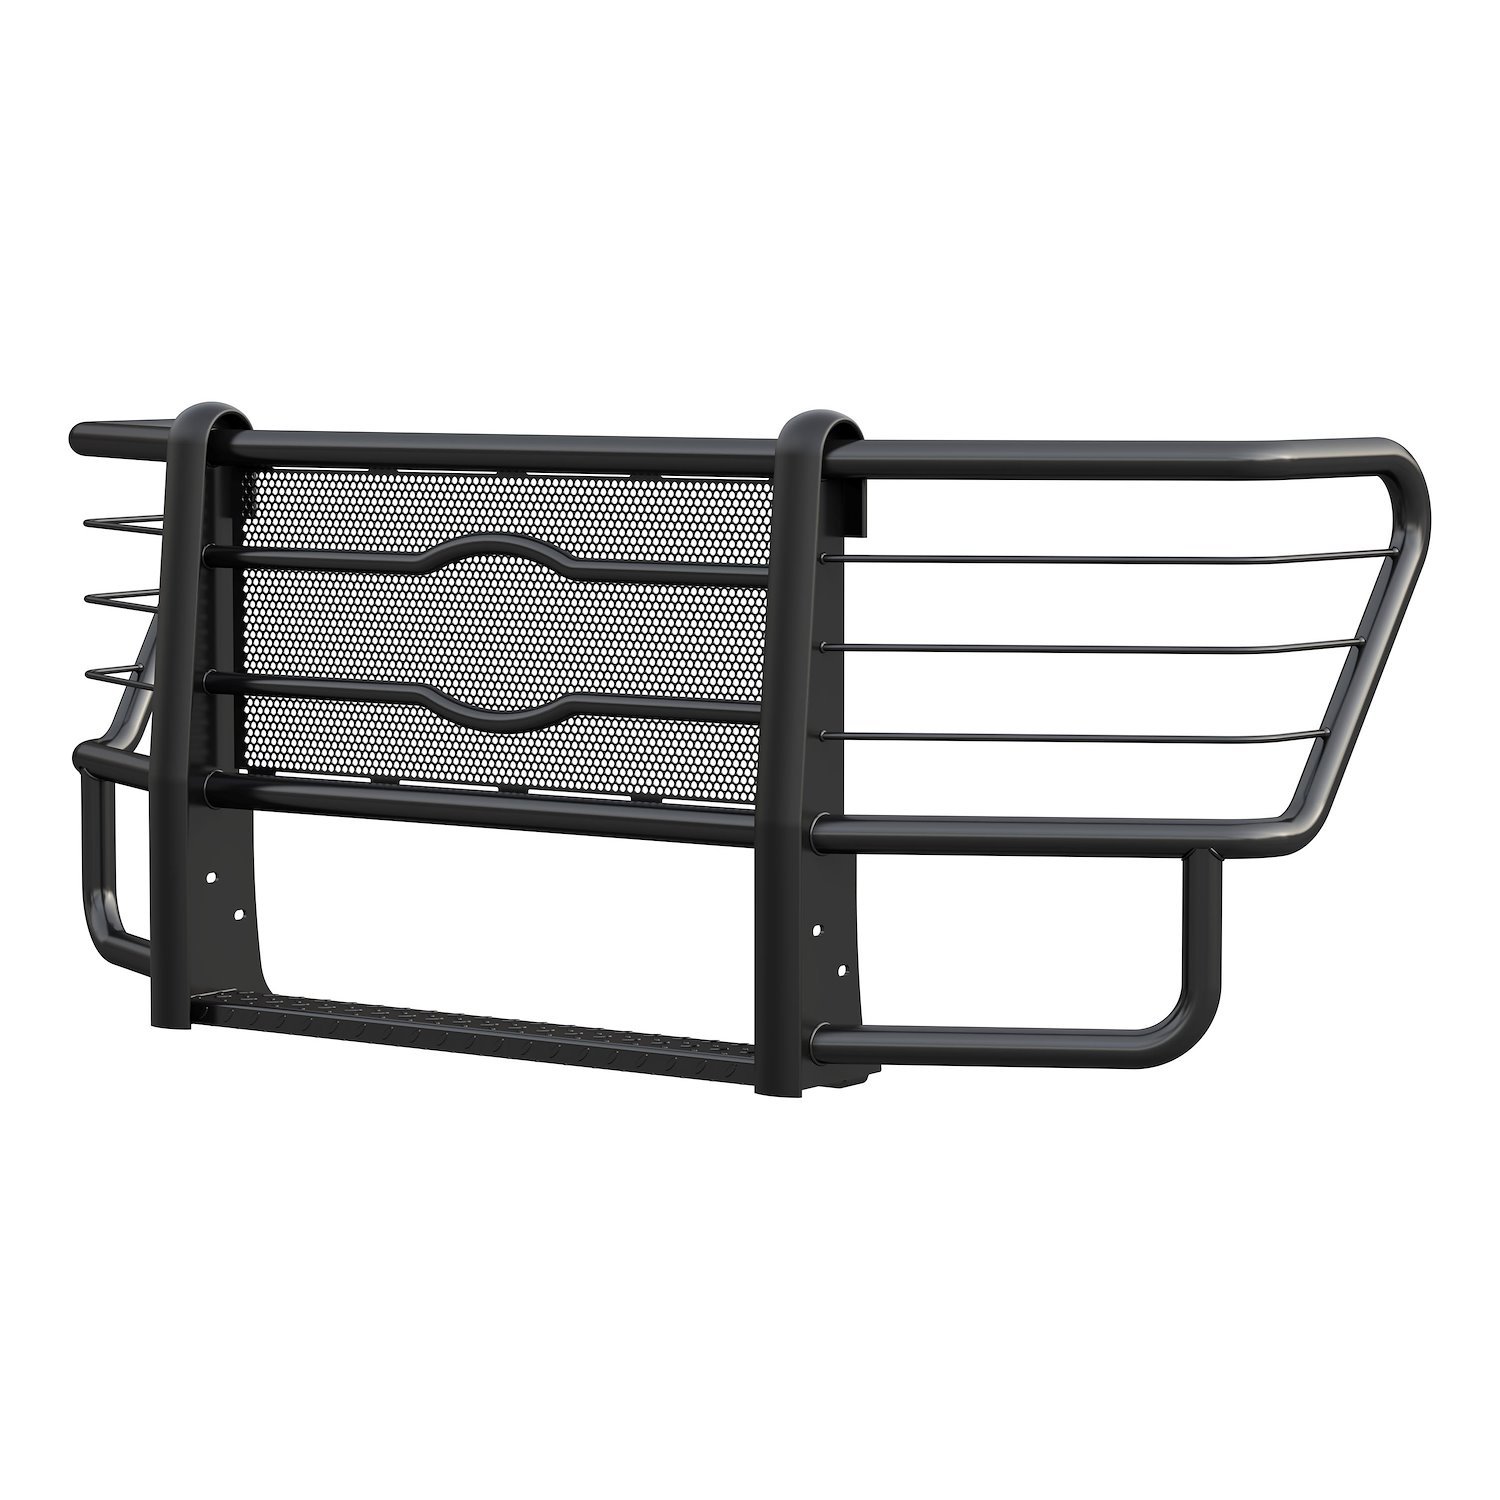 321723 Prowler Max Black Steel Grille Guard, Without Brackets